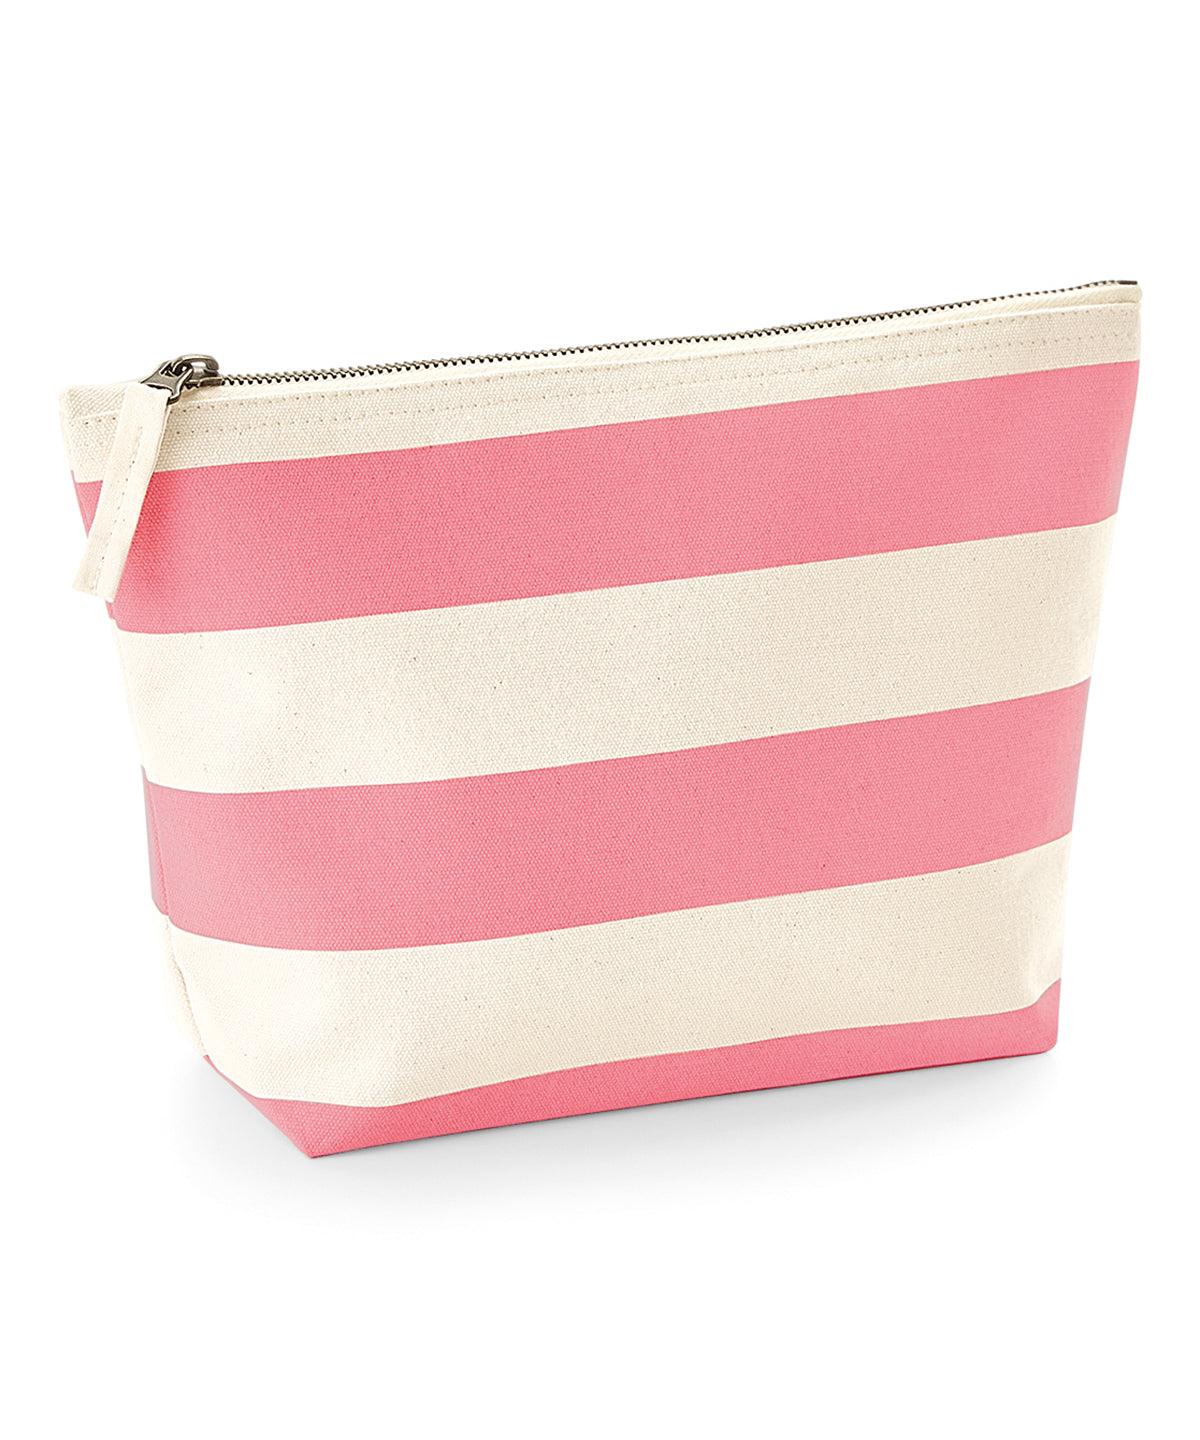 Natural/Pink - Nautical accessory bag Bags Westford Mill Bags & Luggage, Holiday Season Schoolwear Centres